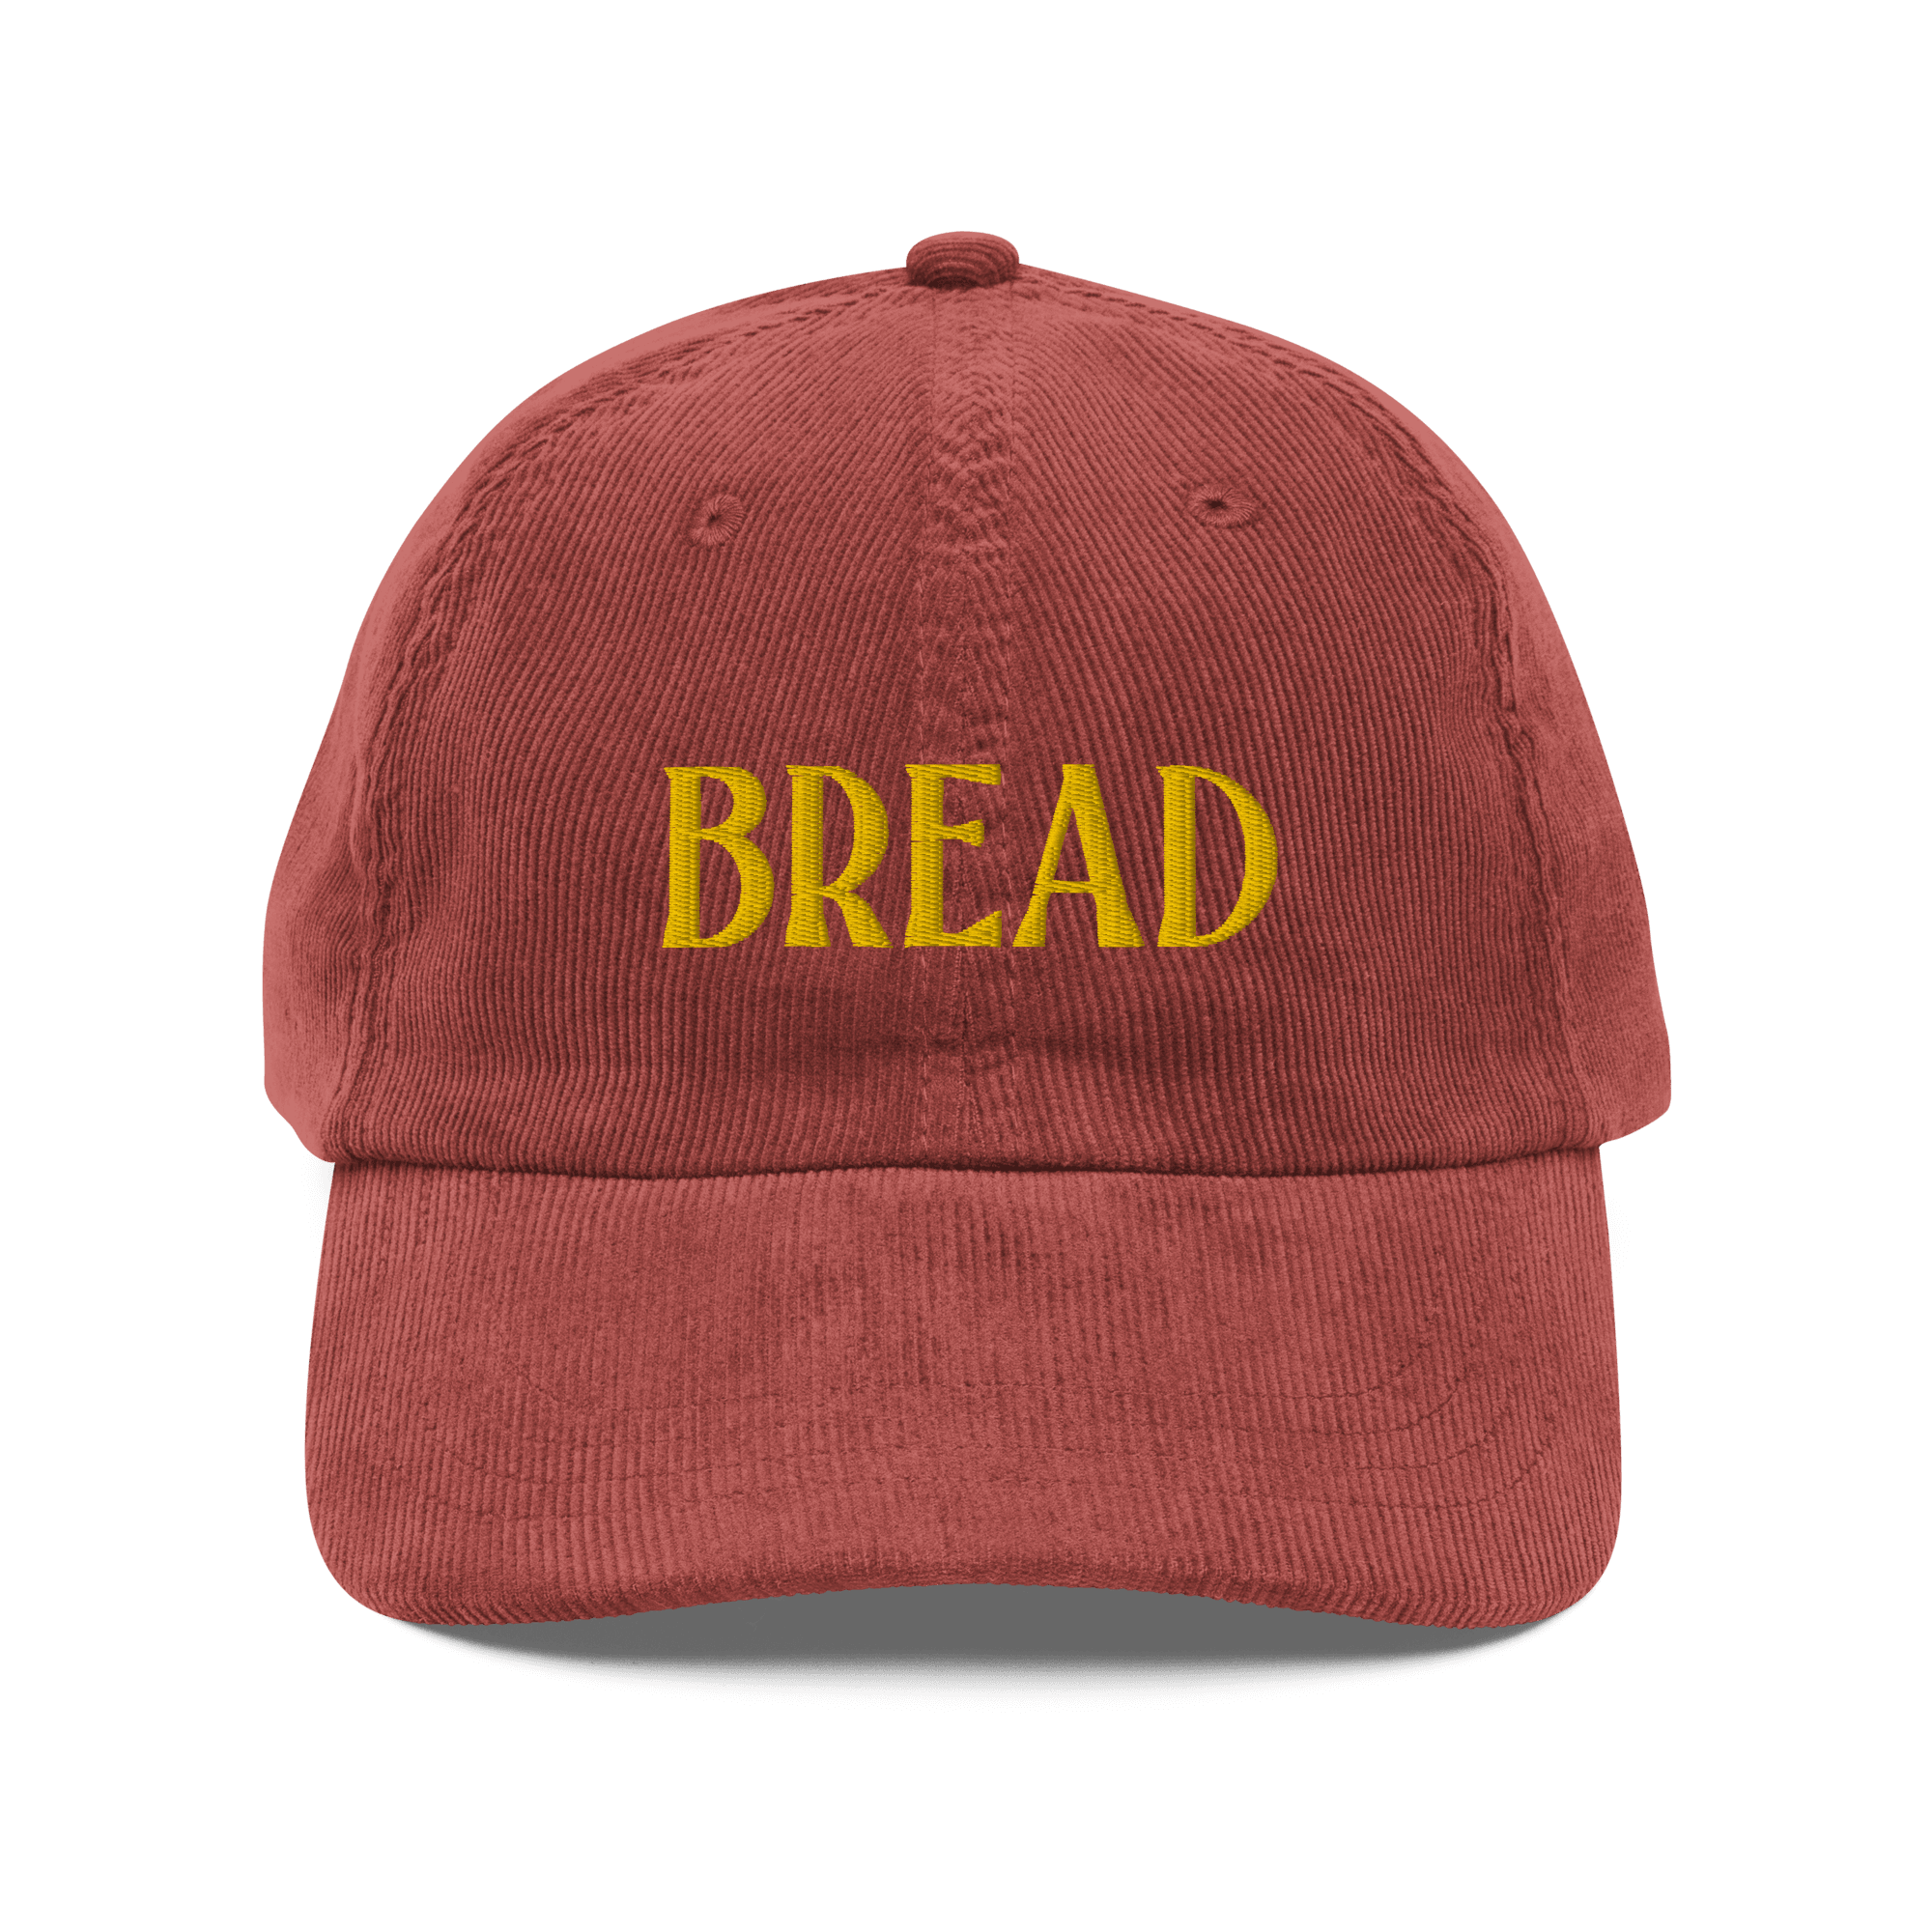 BREAD Embroidered Corduroy Hat - Polychrome Goods 🍊